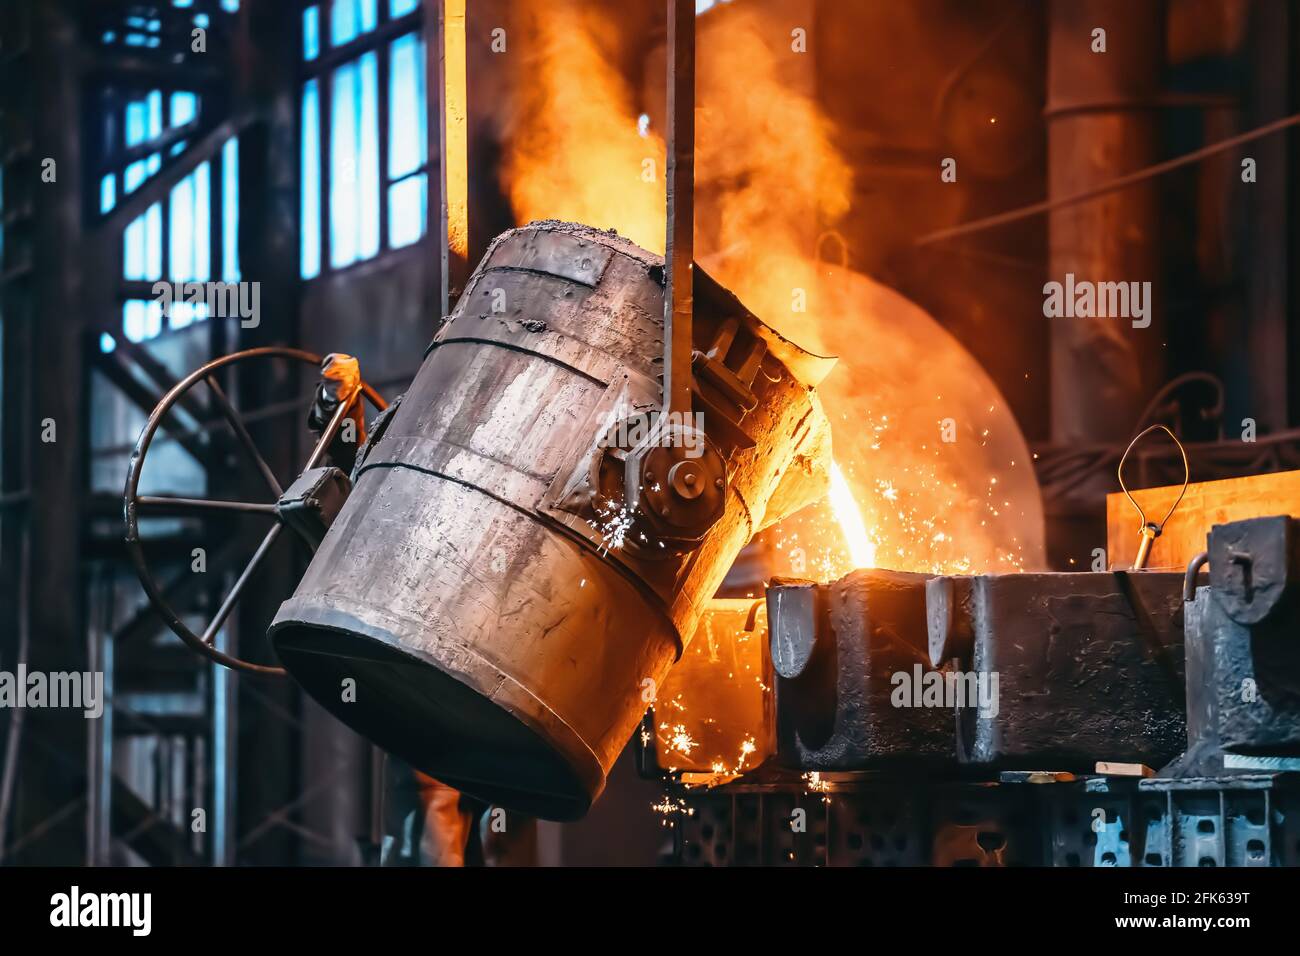 Metal casting process in foundry, liquid metal pouring from container to mold with clubs of steam and sparks, heavy metallurgy industry background. Stock Photo